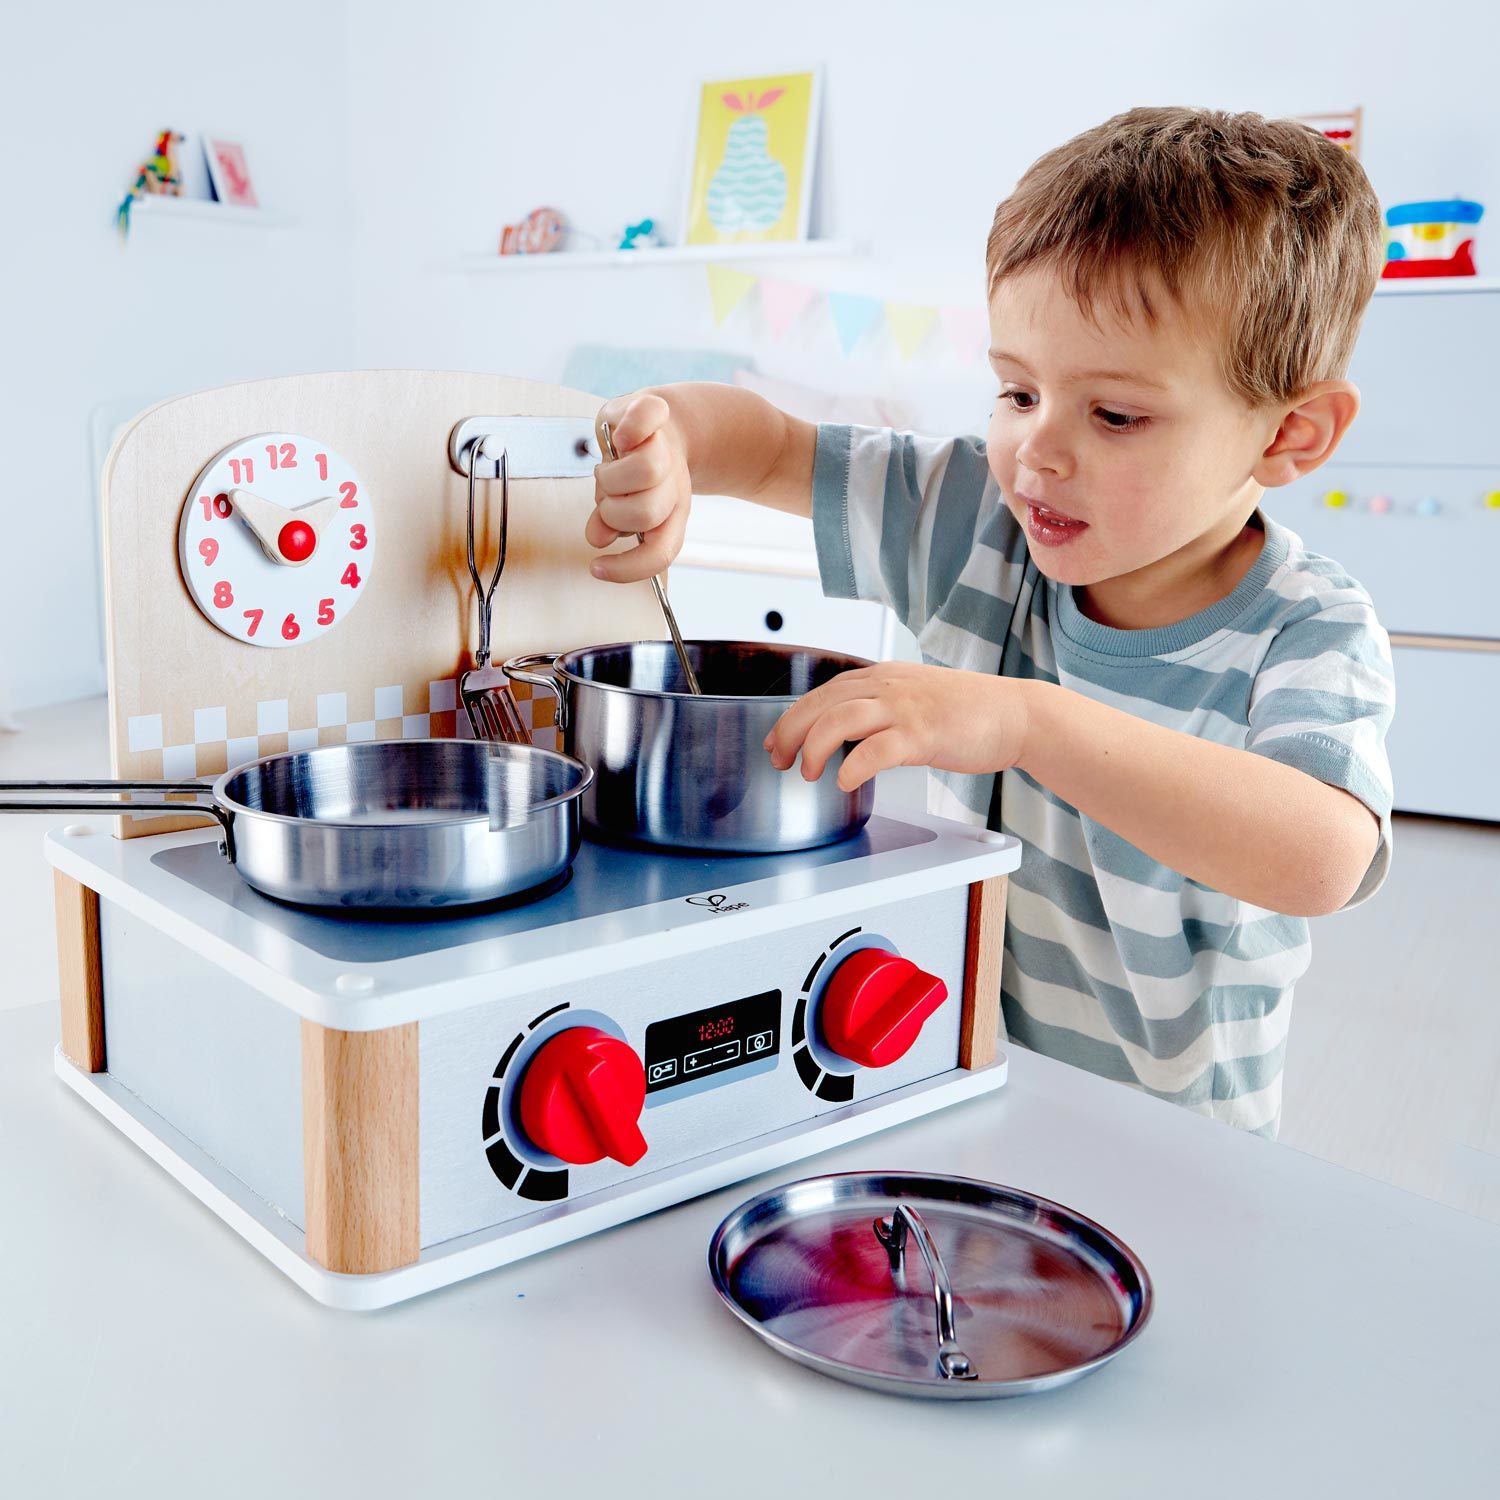 Buy Hape - 2-in-1 Kitchen and Grill Set